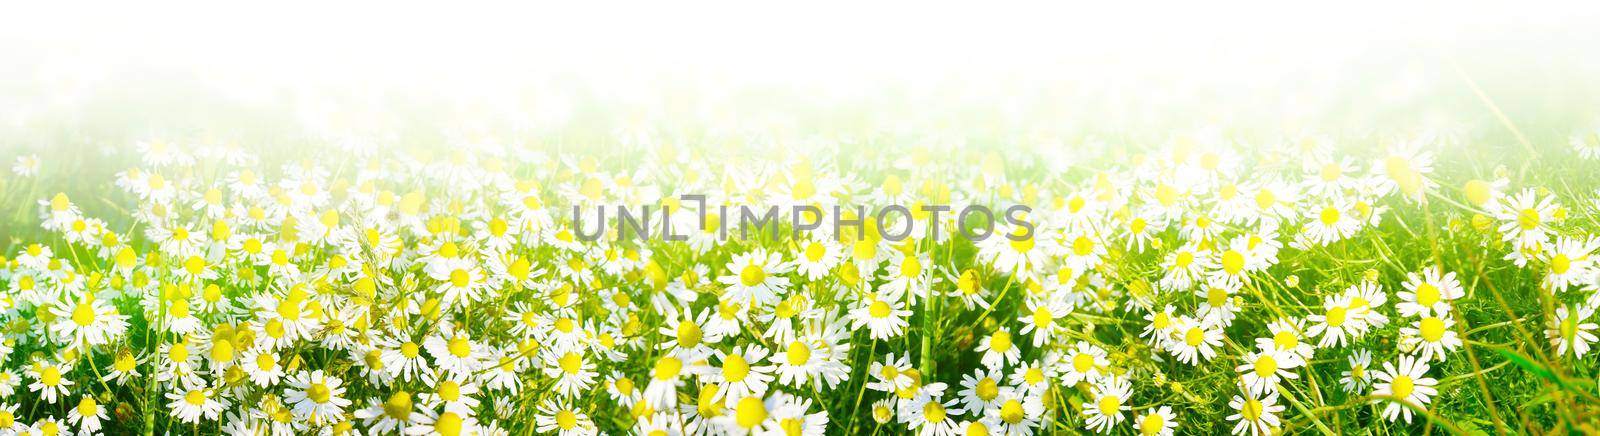 Sunny summer and sping background with chamomile flowers.